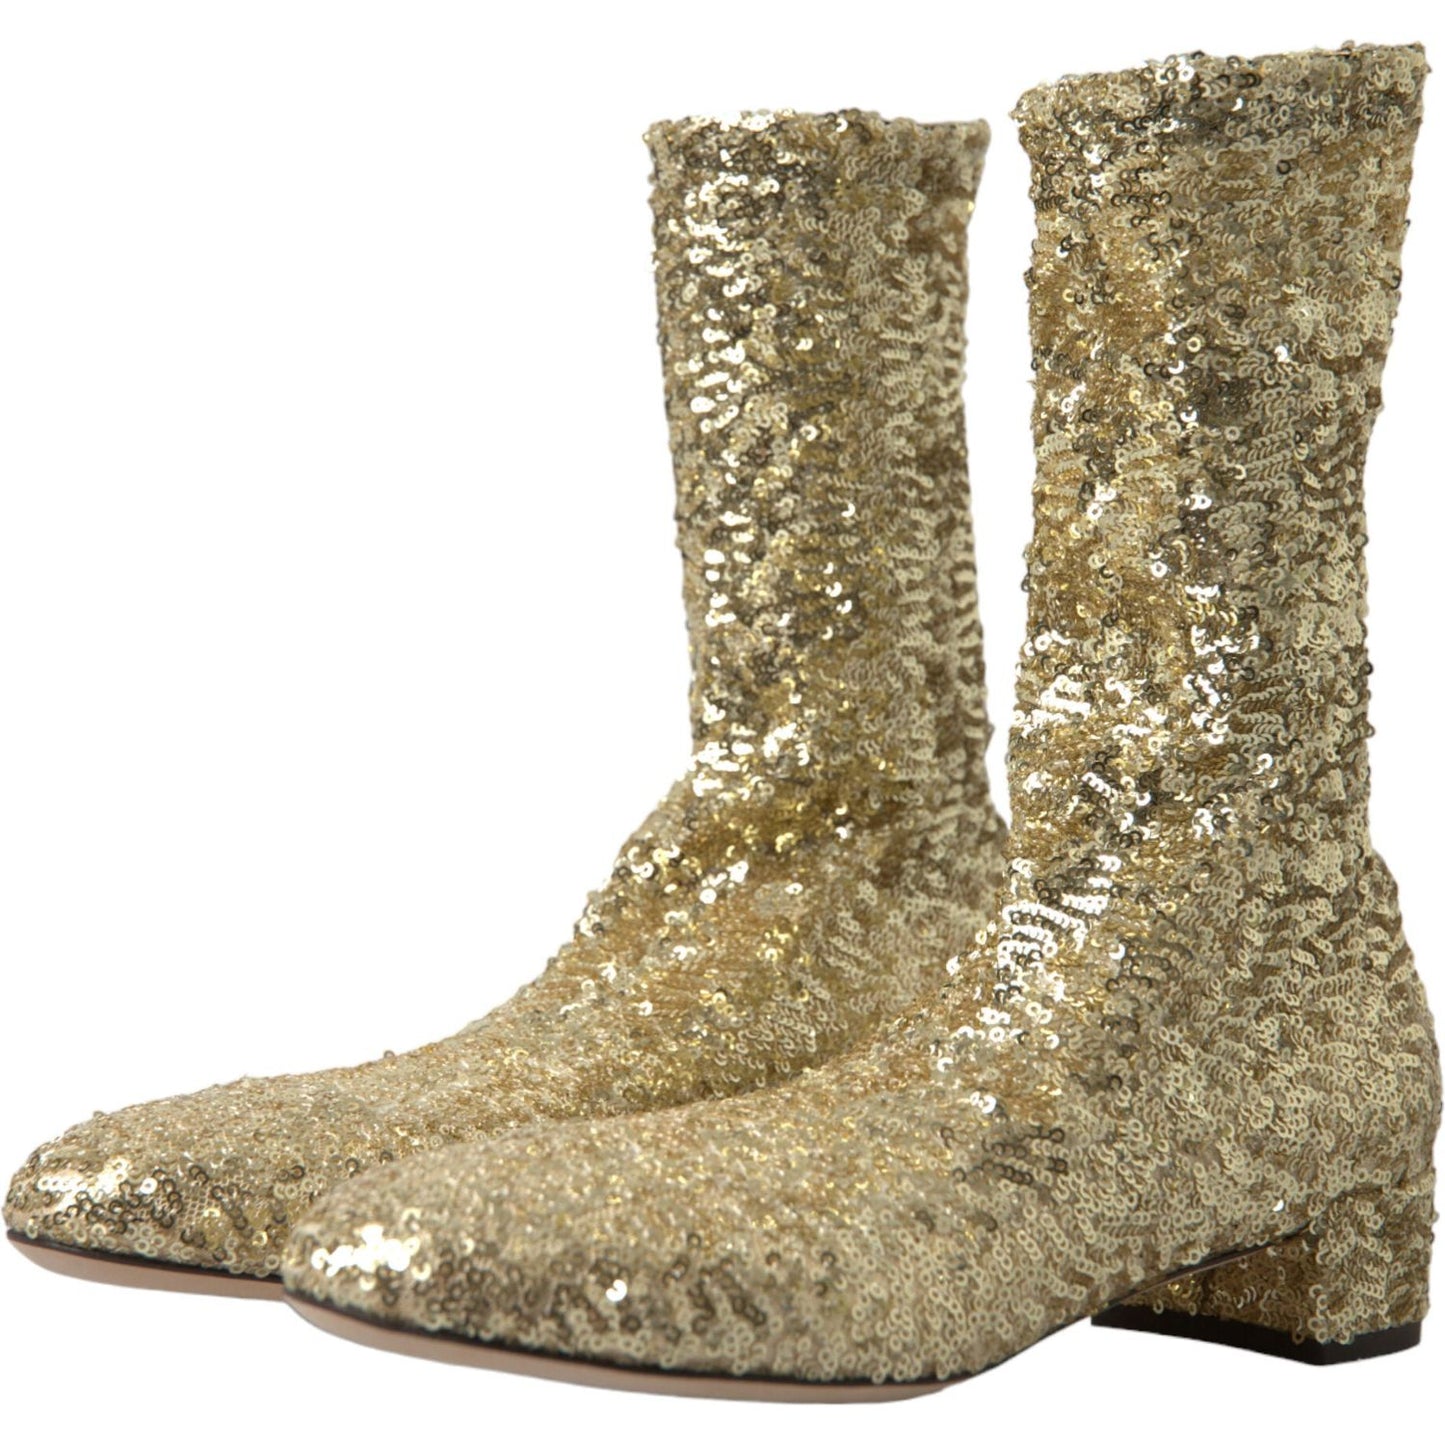 Dolce & Gabbana Elegant Mid Calf Gold Boots Exclusive Design gold-sequined-short-boots-stretch-shoes 465A9706-bg-scaled-bfffb33f-63e.jpg